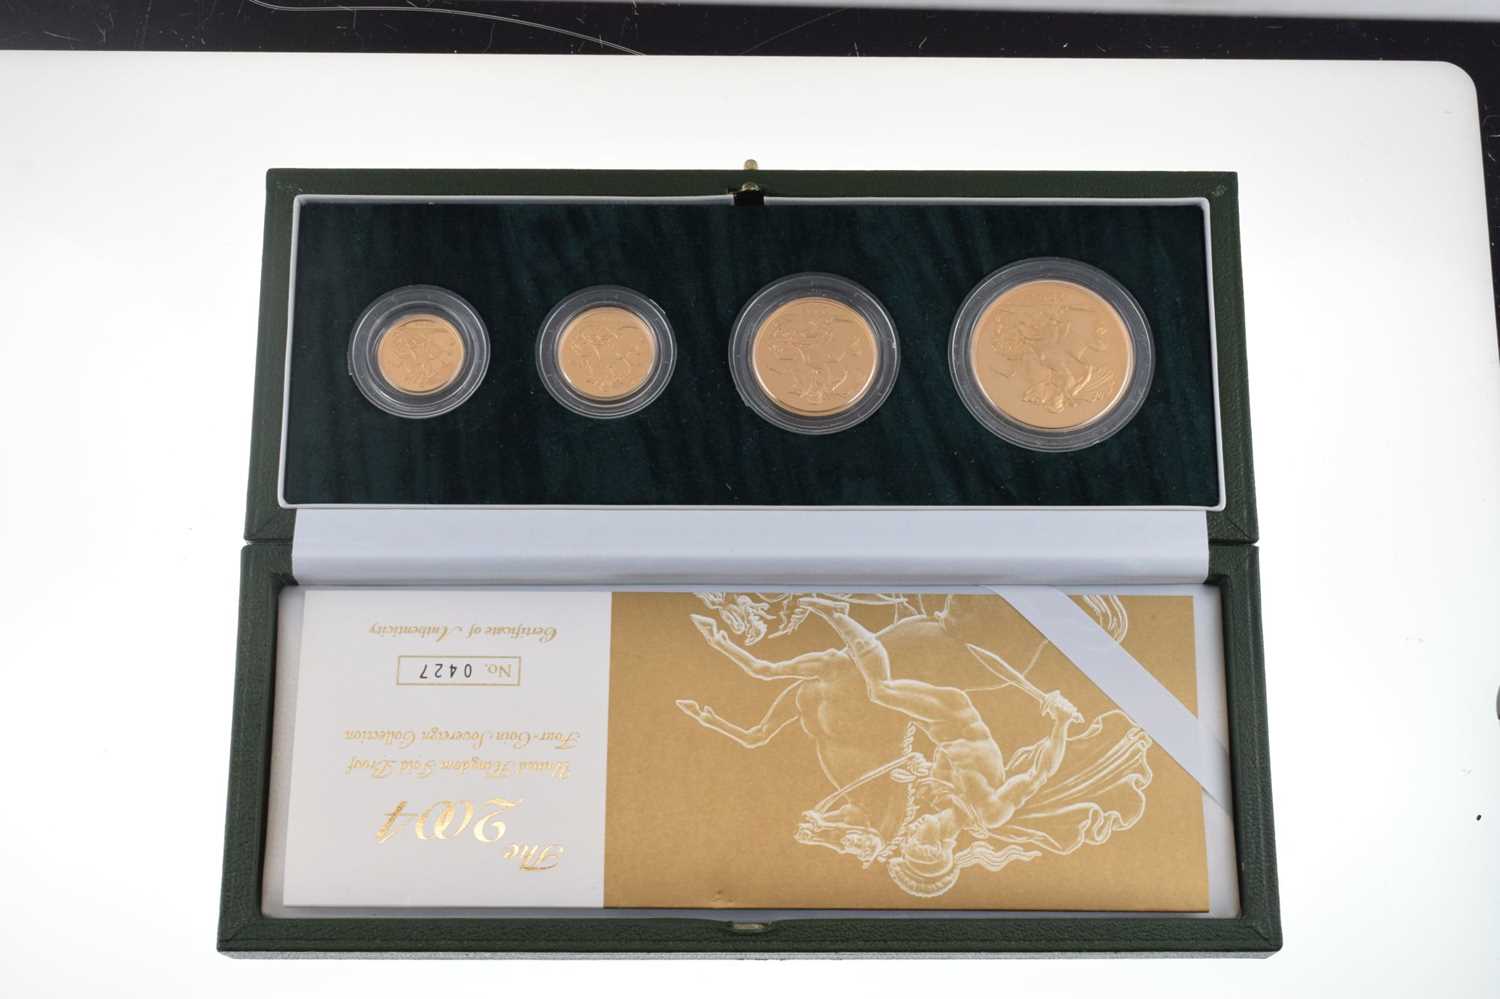 Royal Mint Gold Proof four-coin Sovereign Set, 2004 - Image 11 of 11